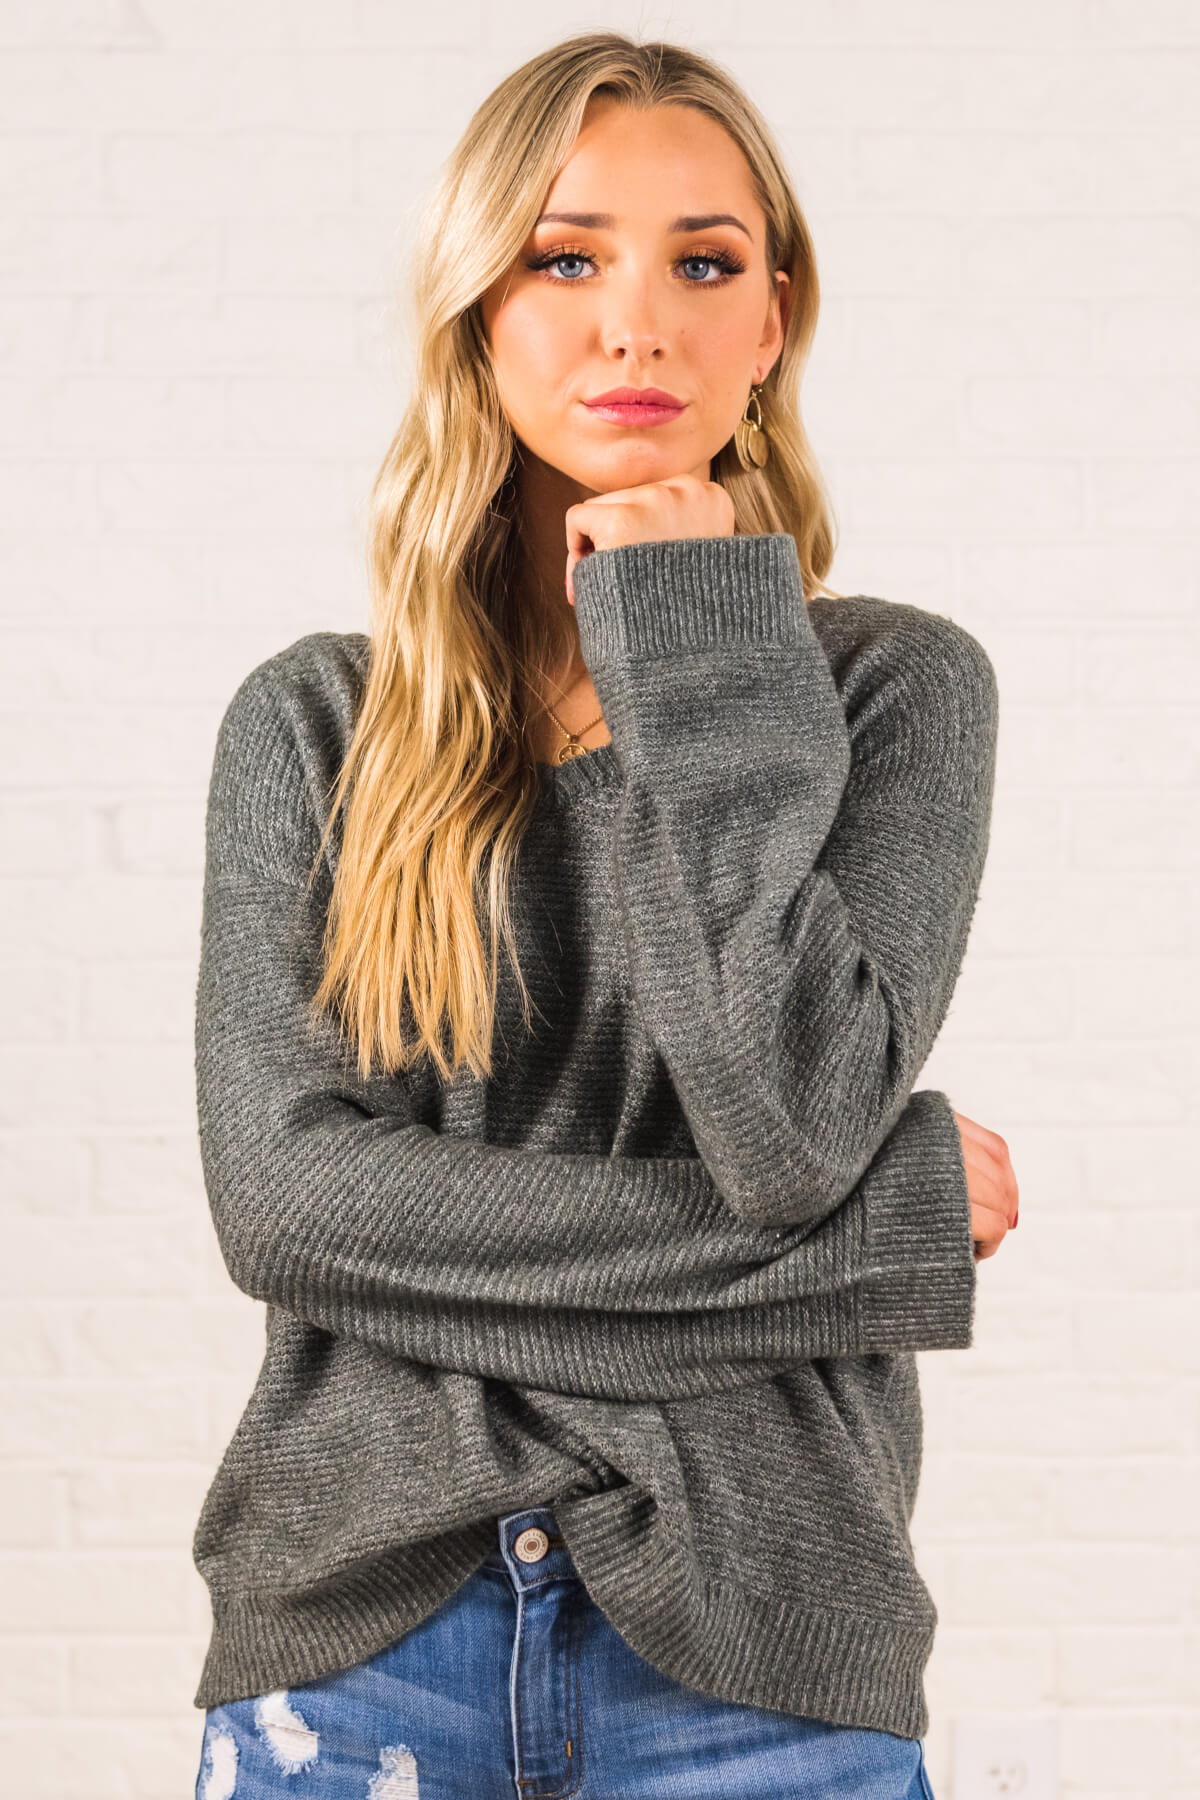 Charcoal Gray Boutique Lightweight Sweaters for Women